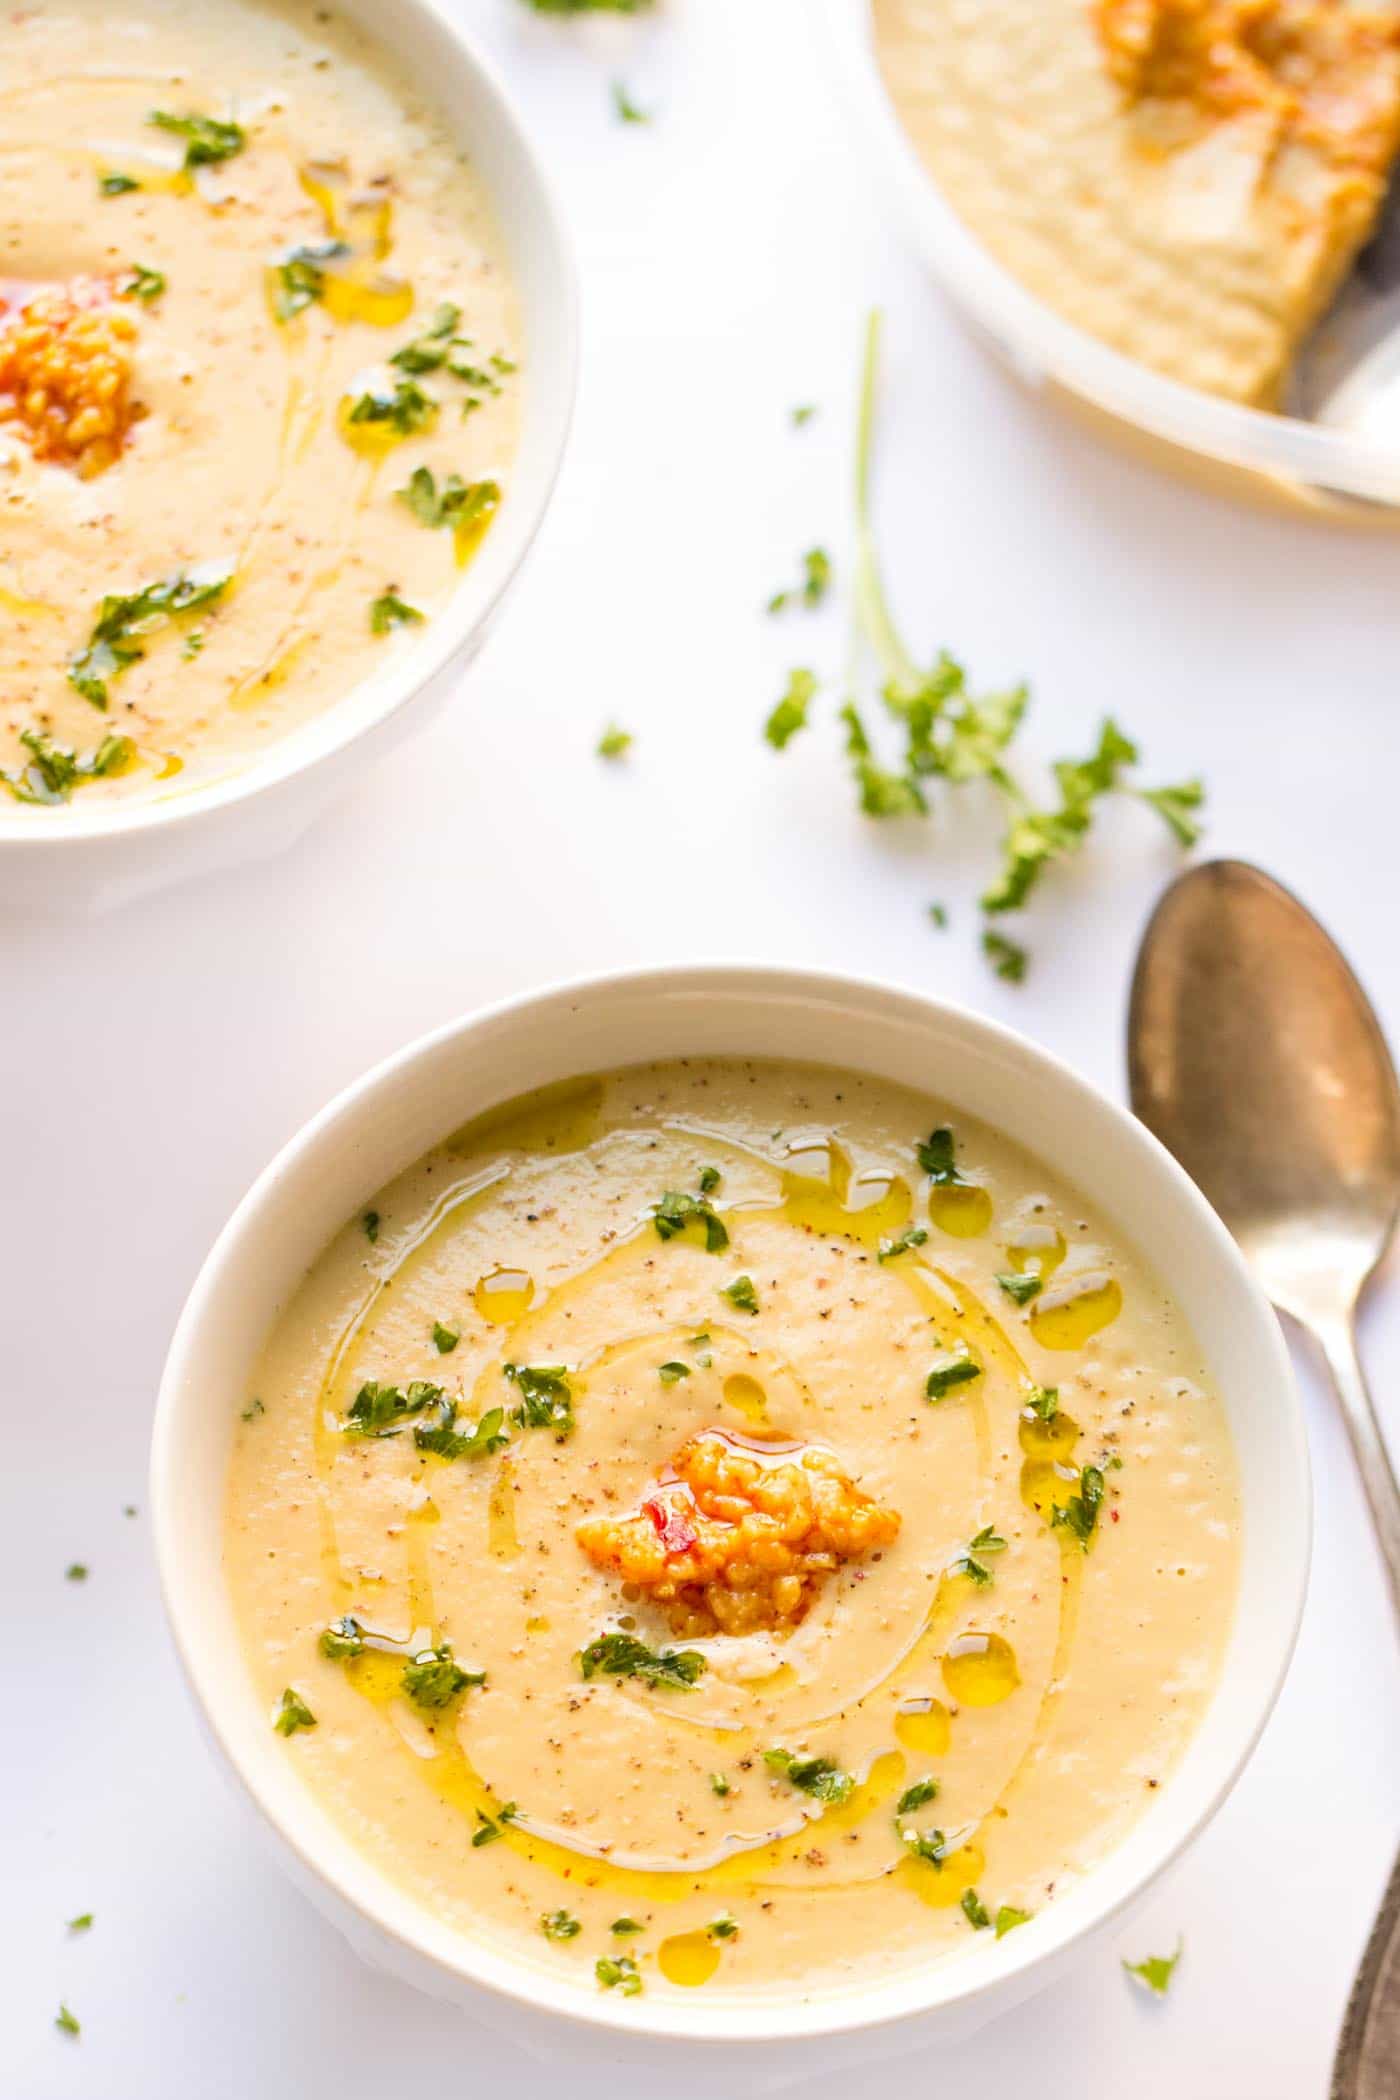 This cauliflower chowder comes together in 30 MINUTES, is filled with protein and roasted garlic flavor {VEGAN}